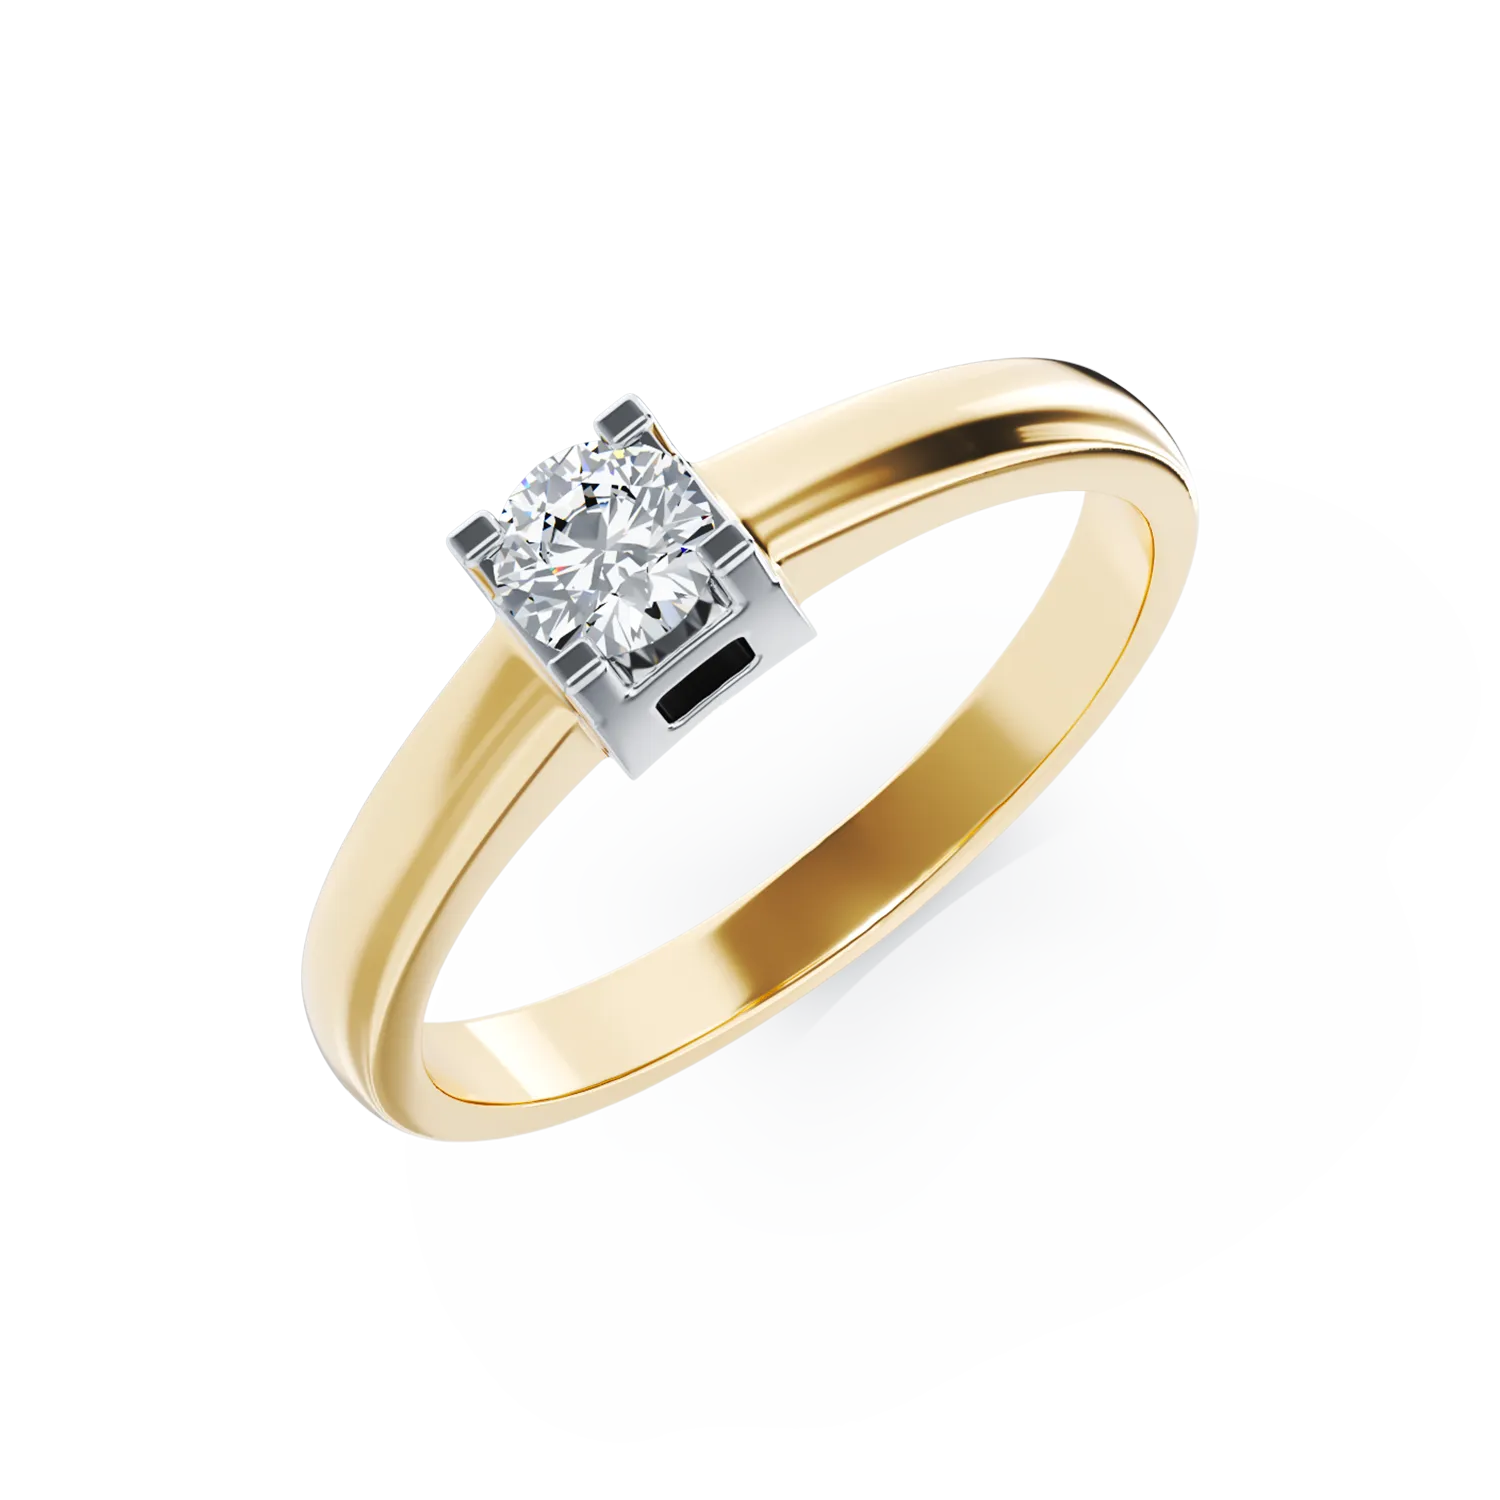 18K yellow gold engagement ring with 0.31ct solitaire diamond